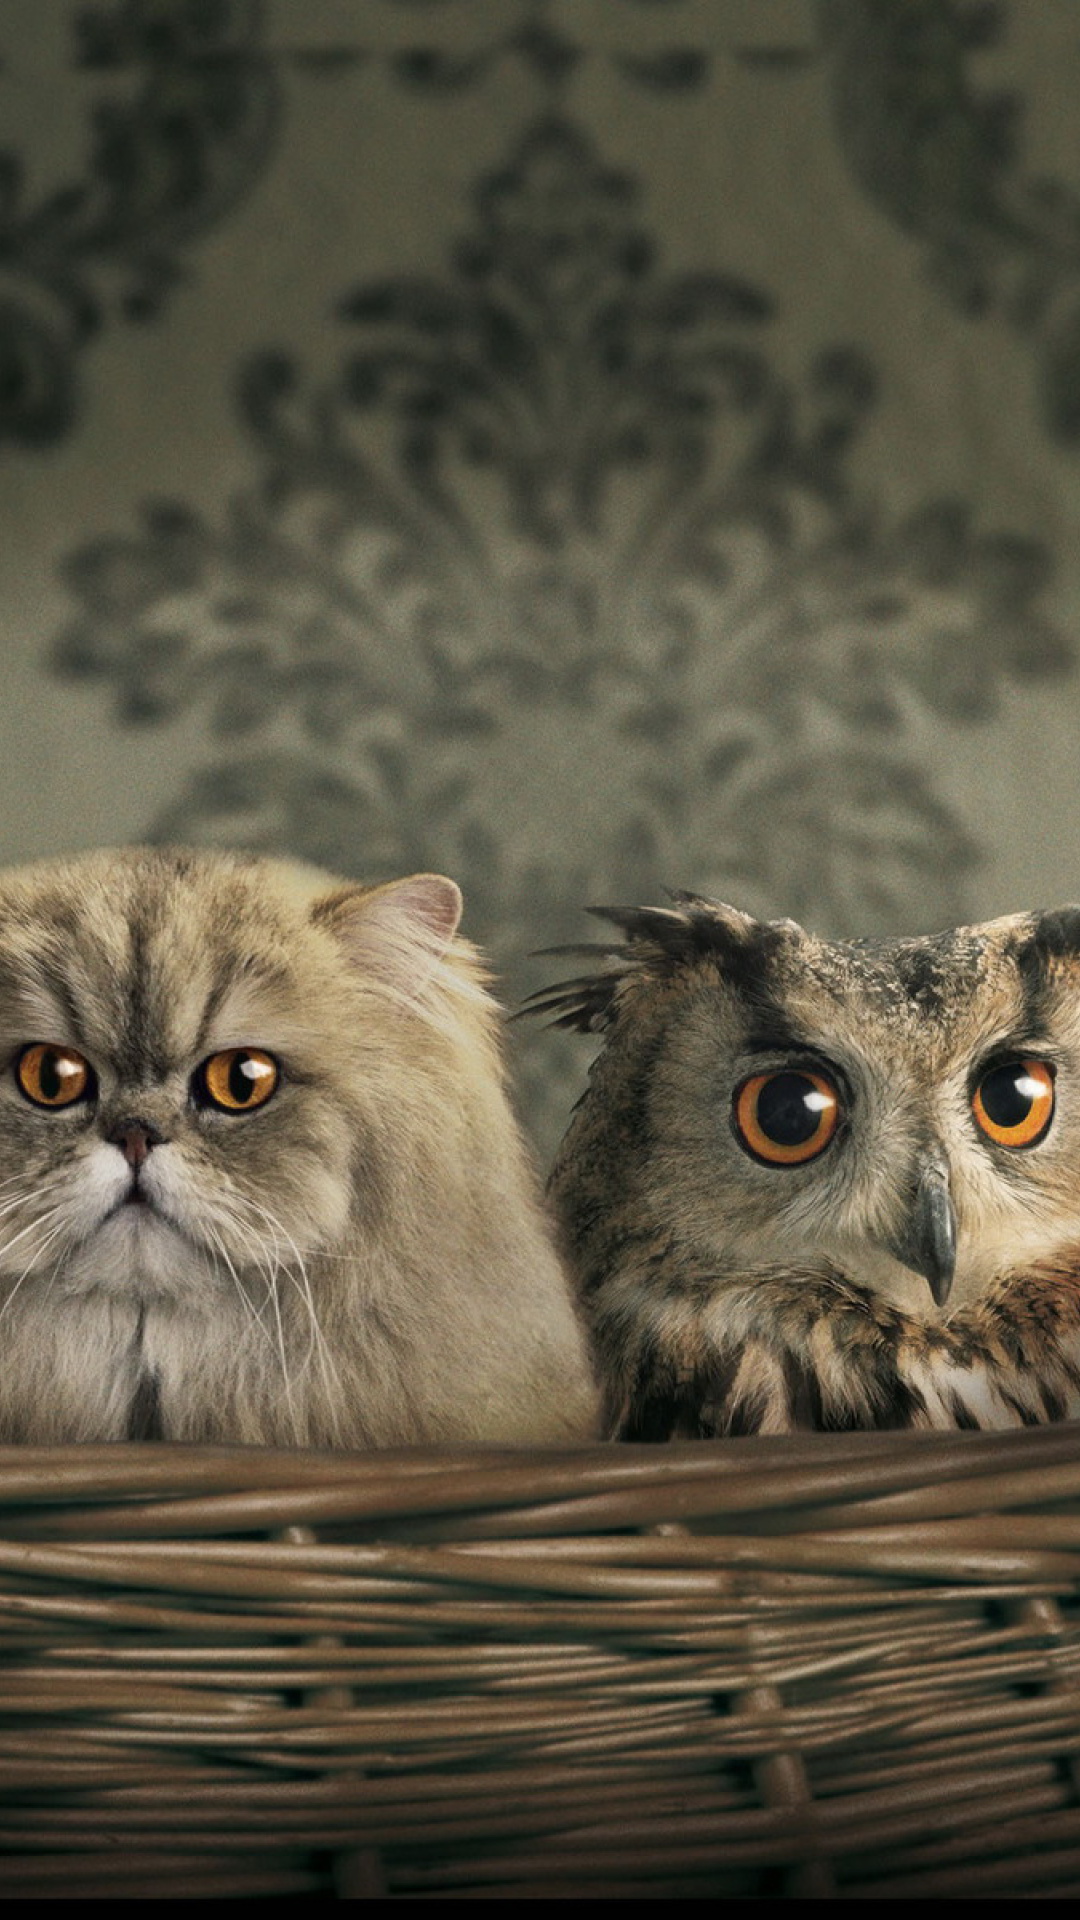 Cats and Owl as Third Wheel wallpaper 1080x1920